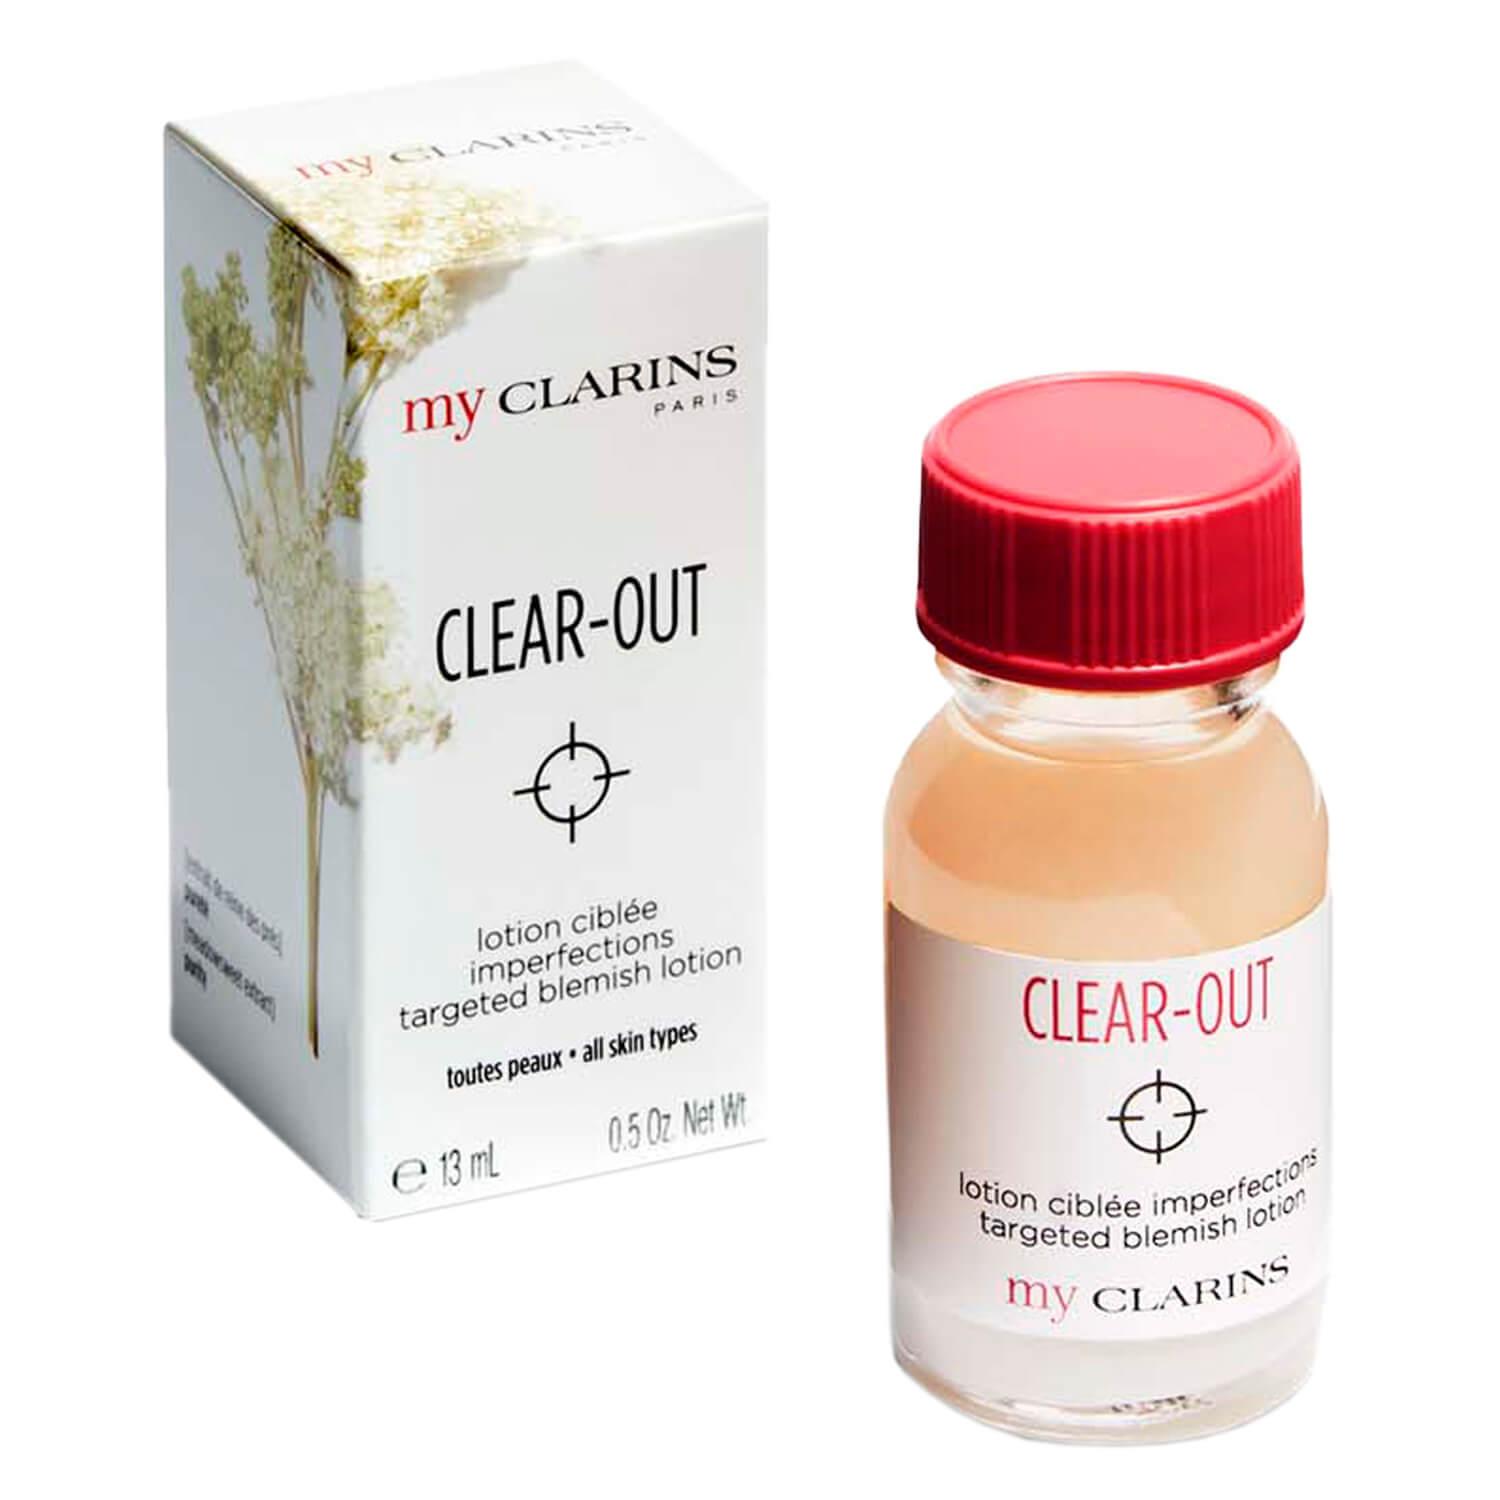 myCLARINS - CLEAR-OUT Targeted Blemish Lotion